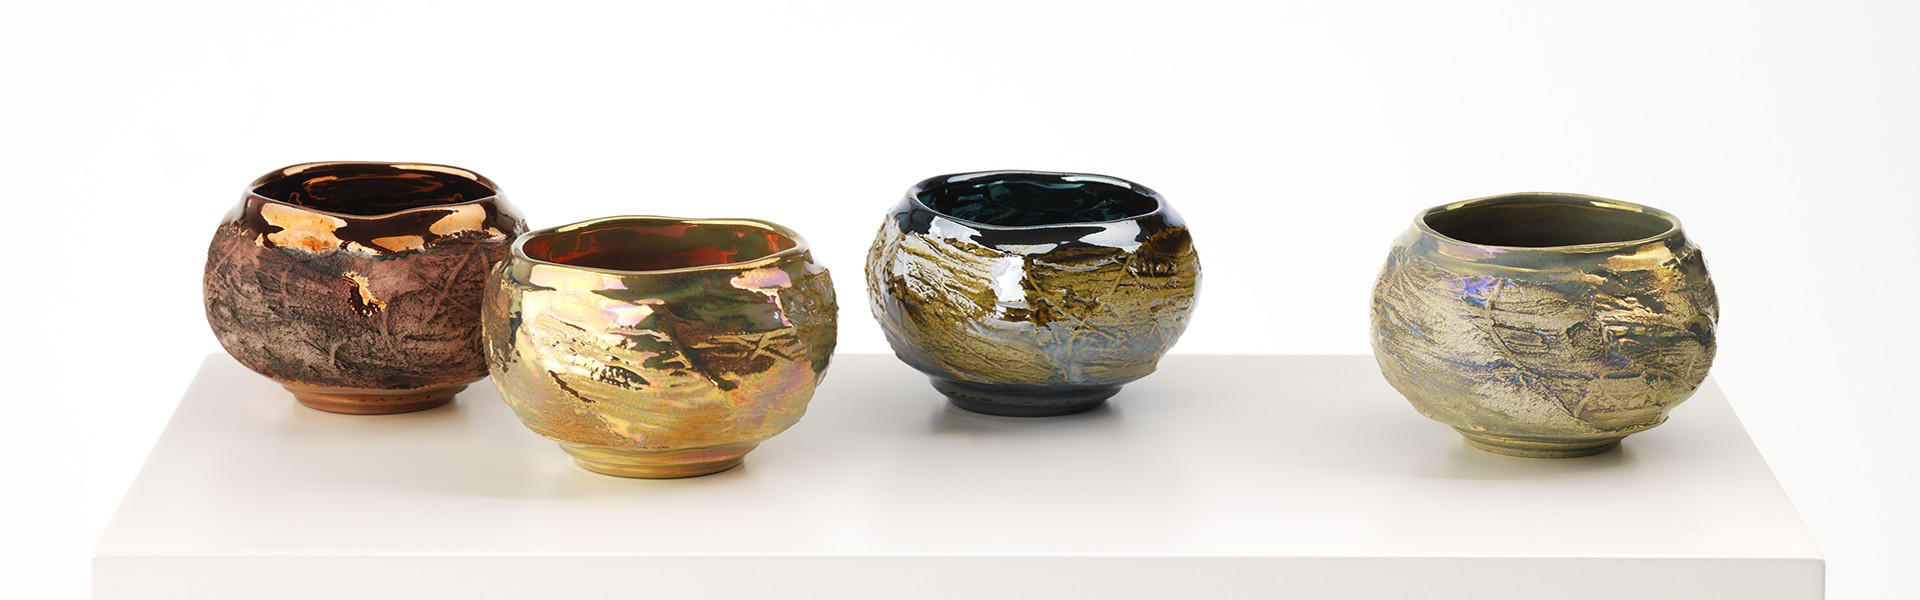 Textured Faceted Bowls glazed with in glaze lustre inspired by frozen water